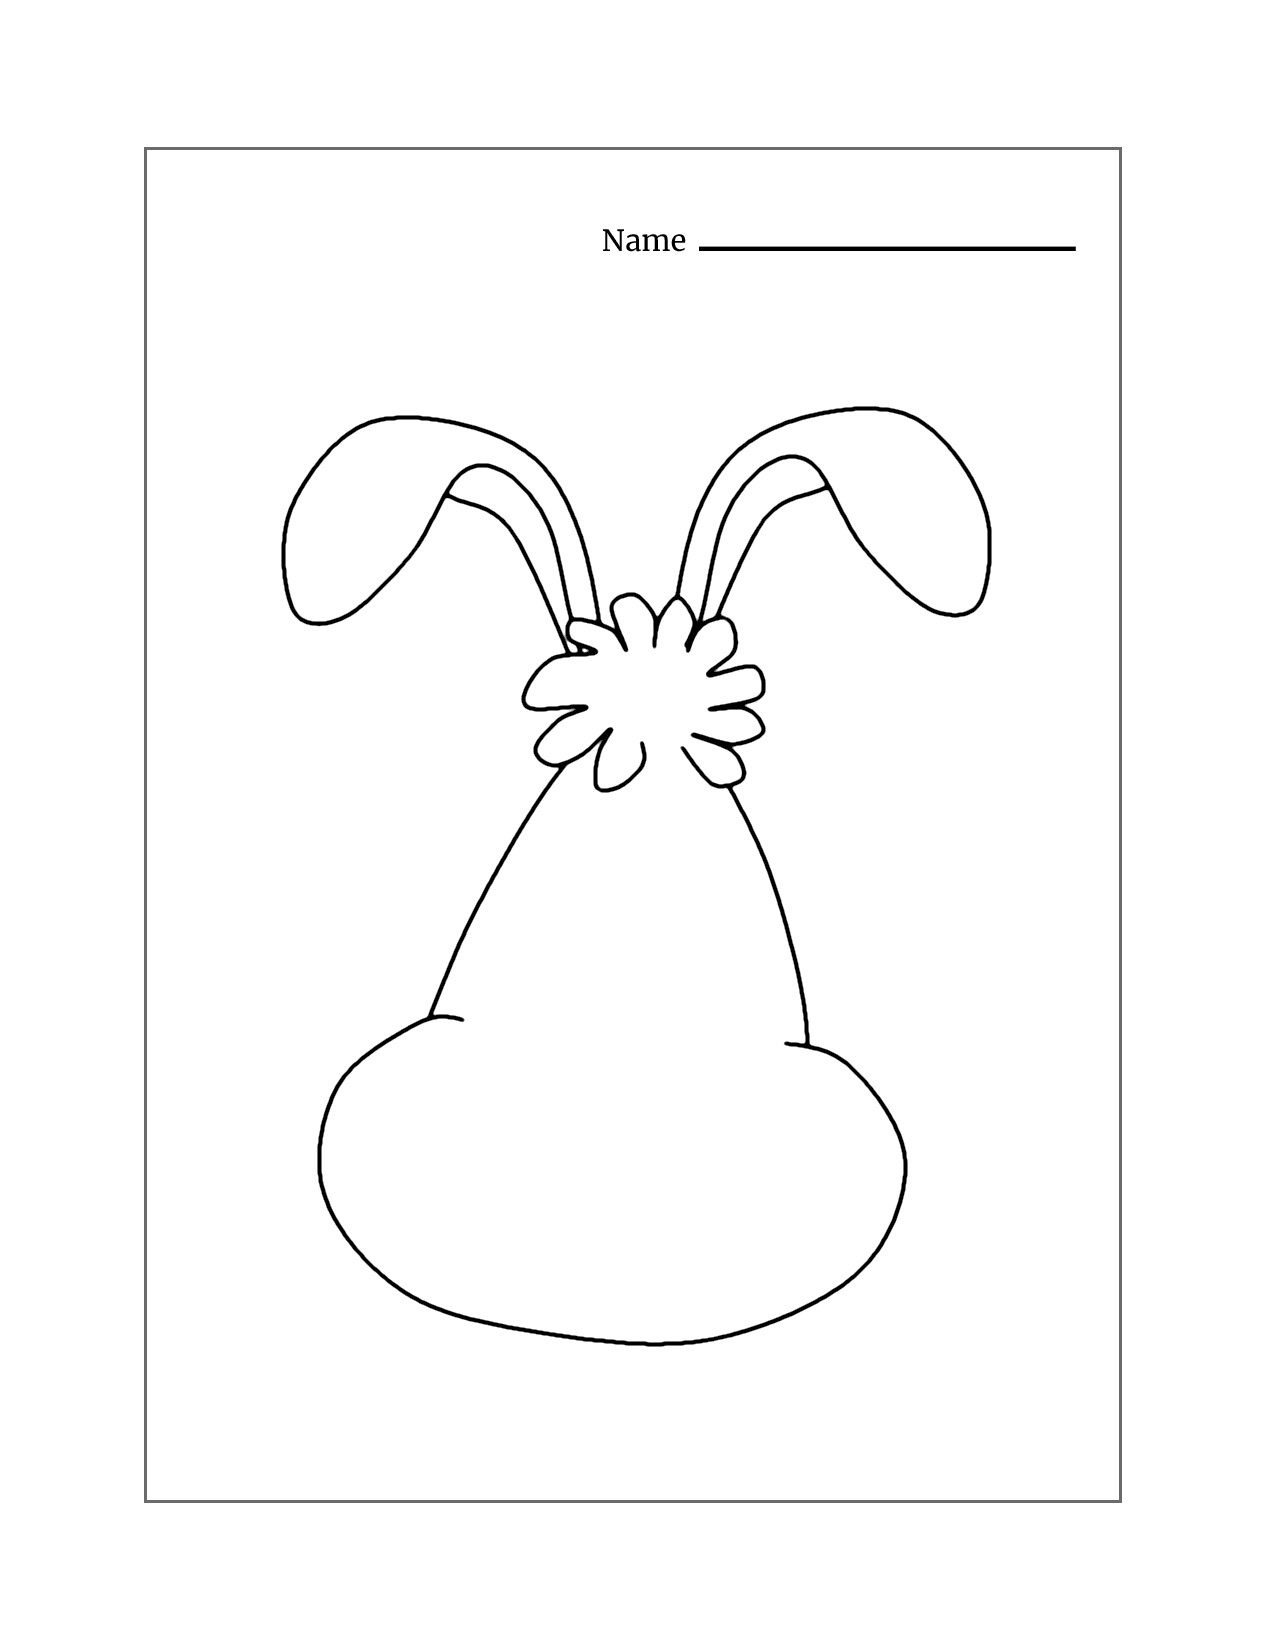 Draw The Rabbit Face Worksheet